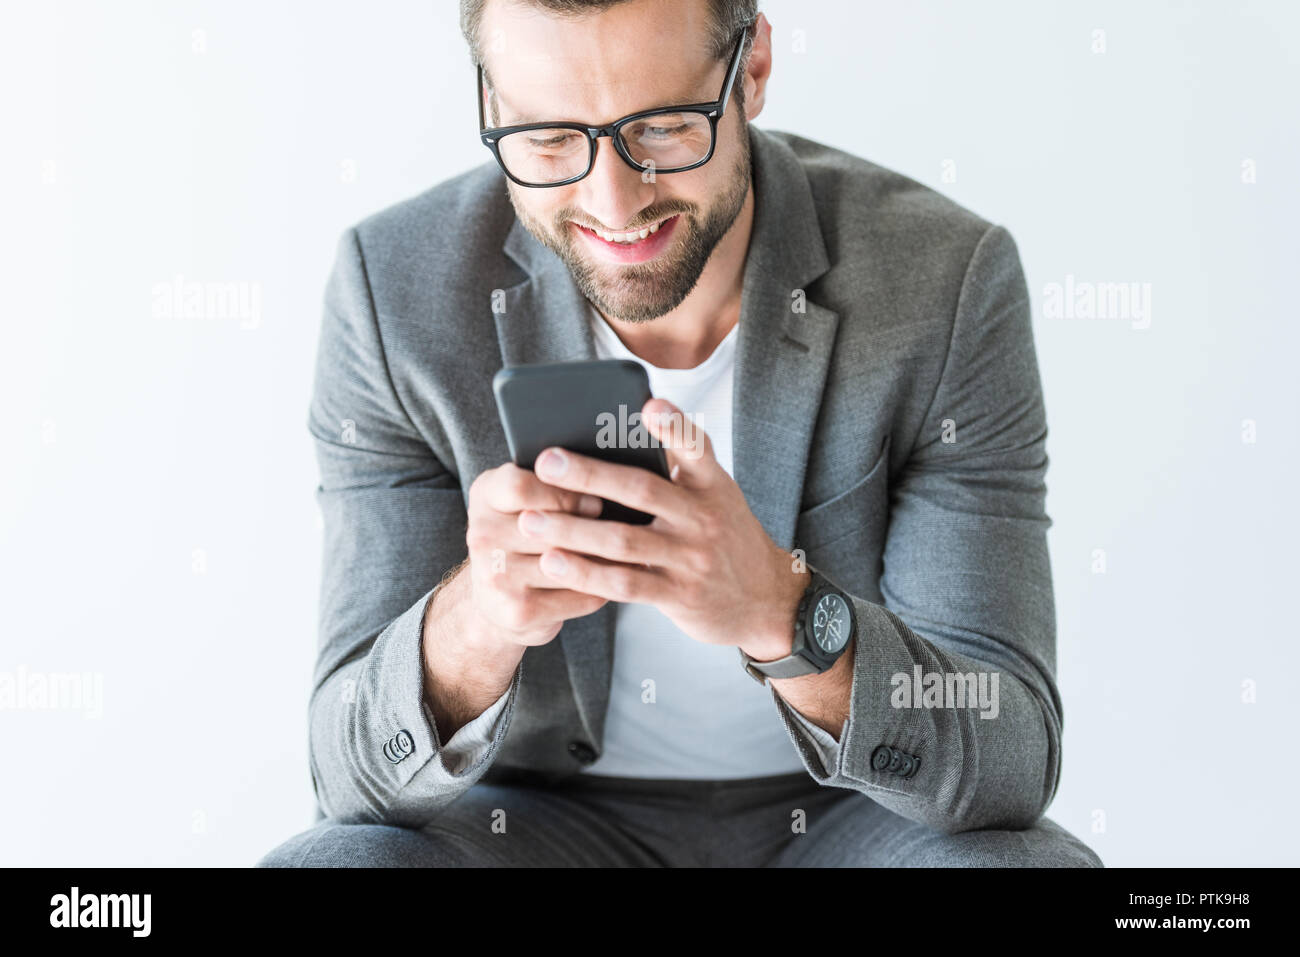 handsome smiling man in gray suit using smartphone, isolated on white Stock Photo